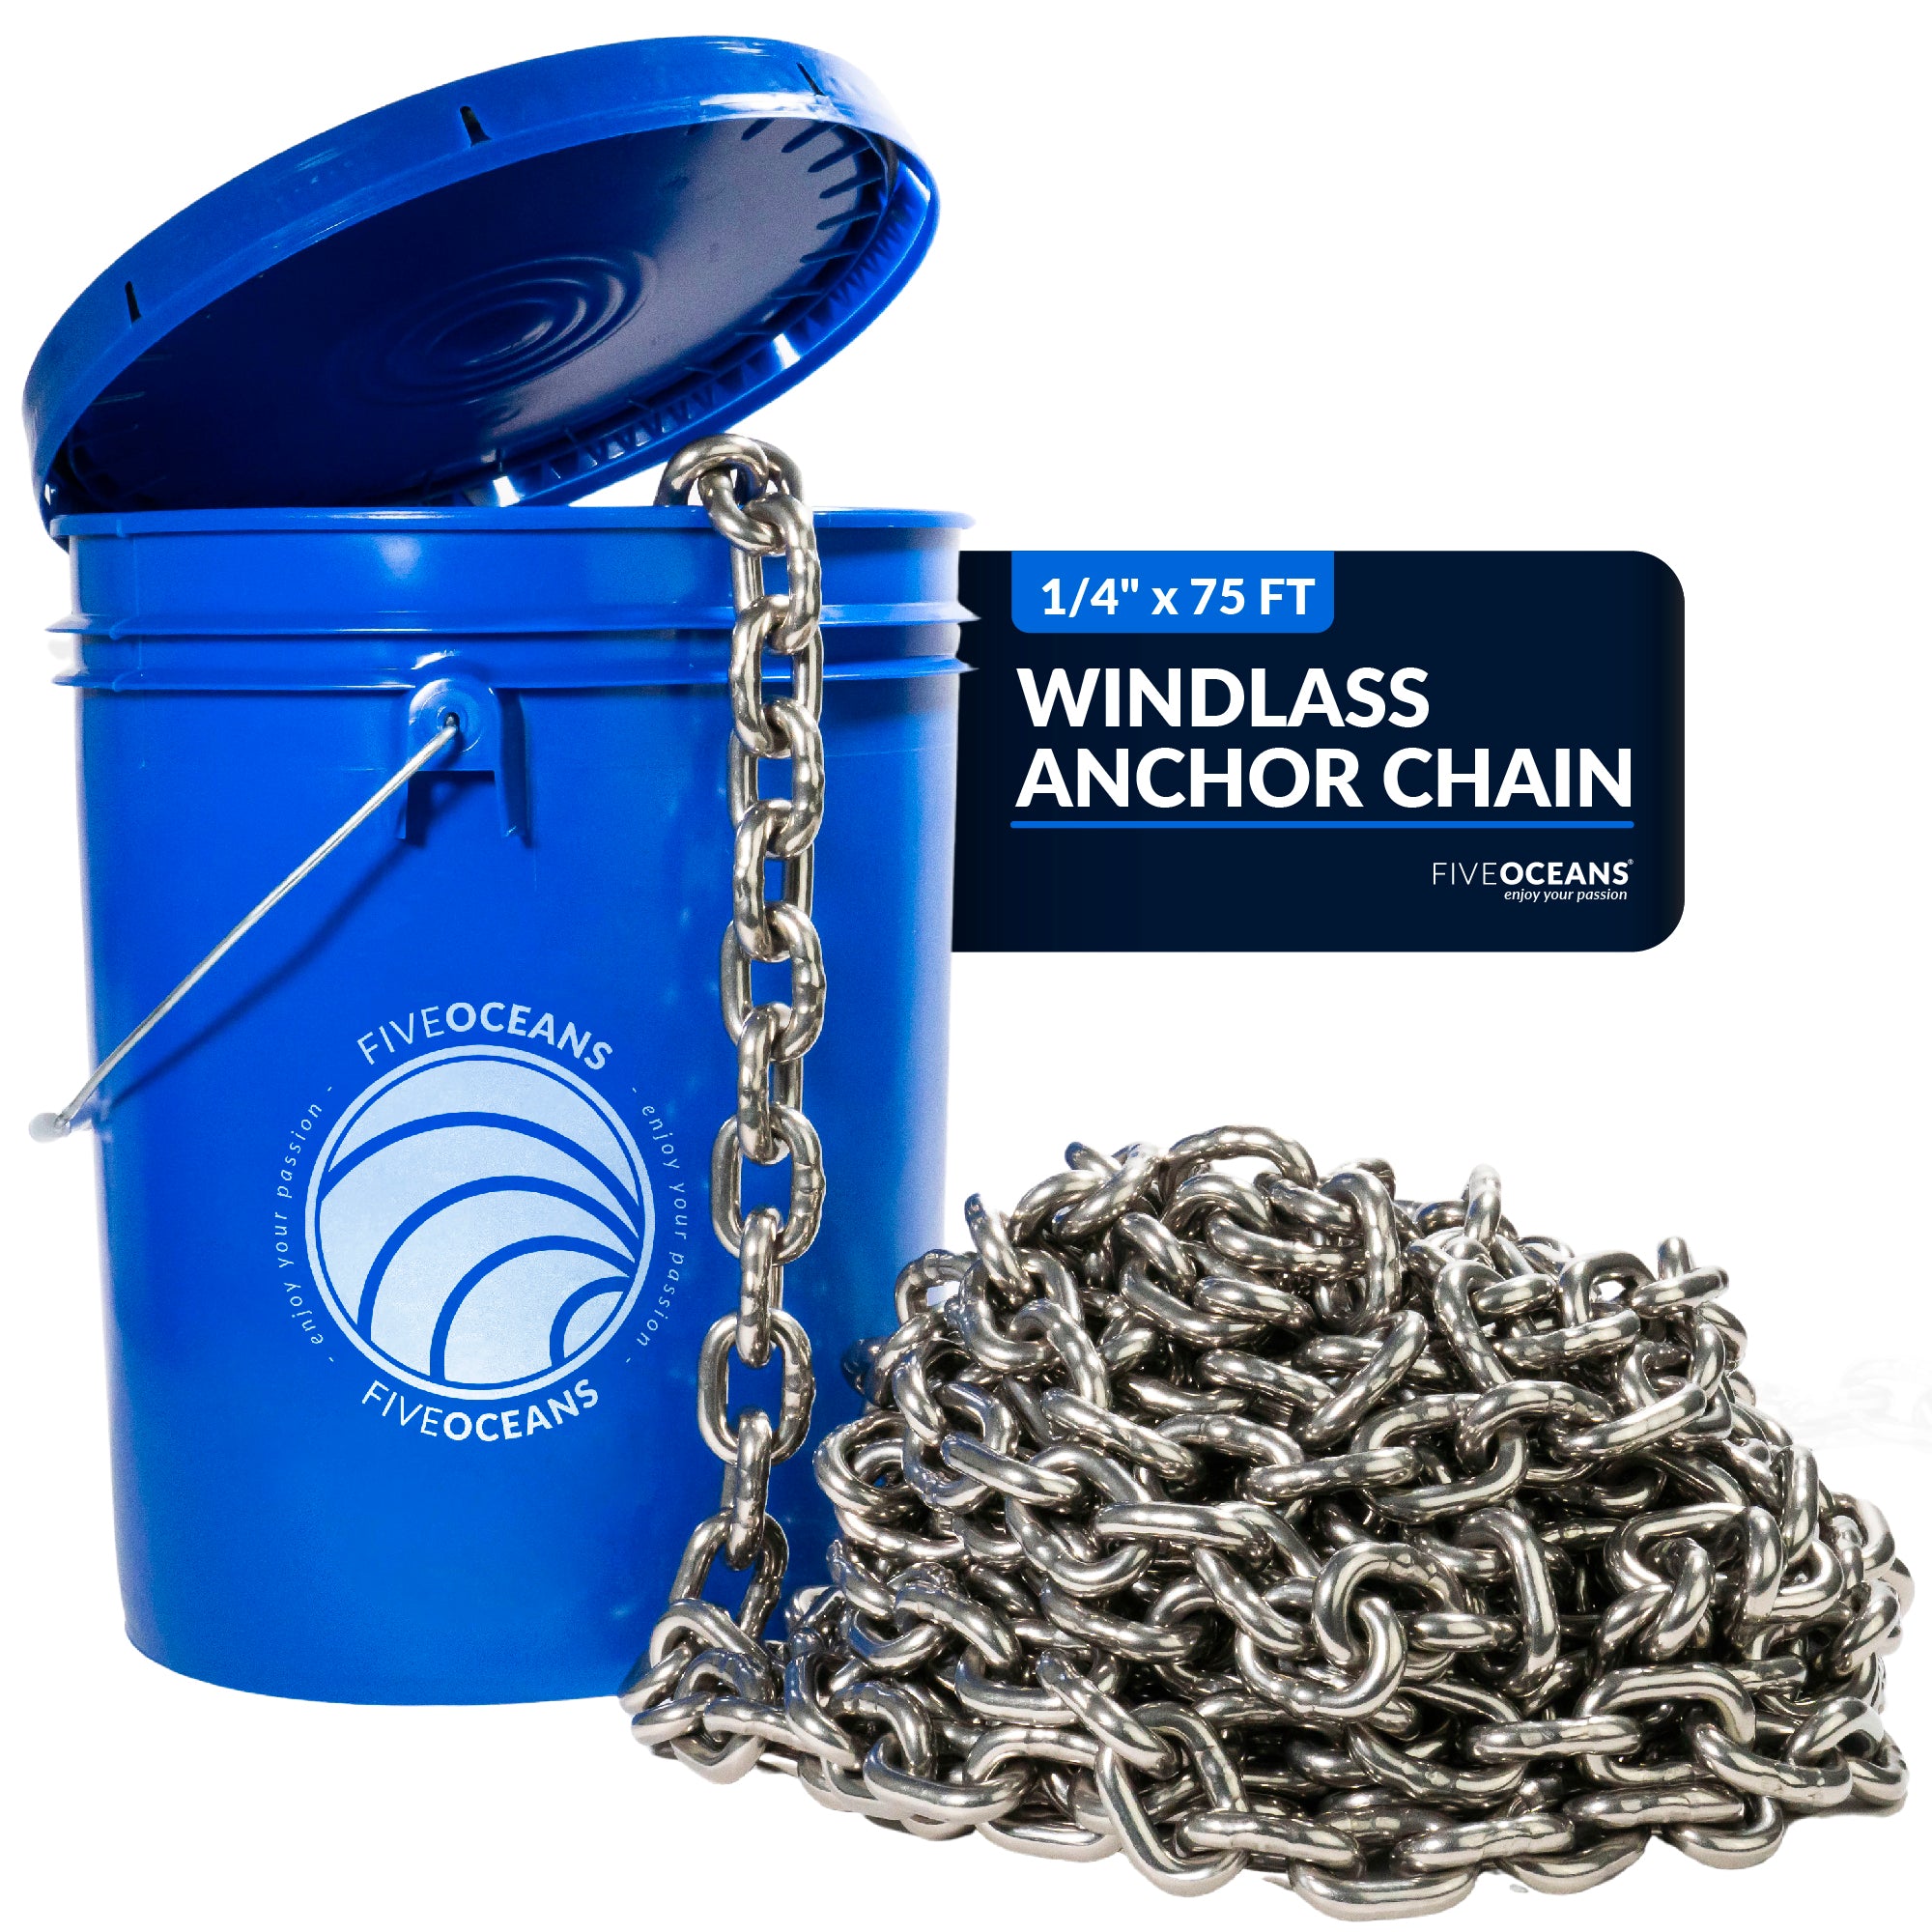 1/4" x 75' Boat Windlass Anchor Chain HT G4 Stainles Steel - FO4492-M75